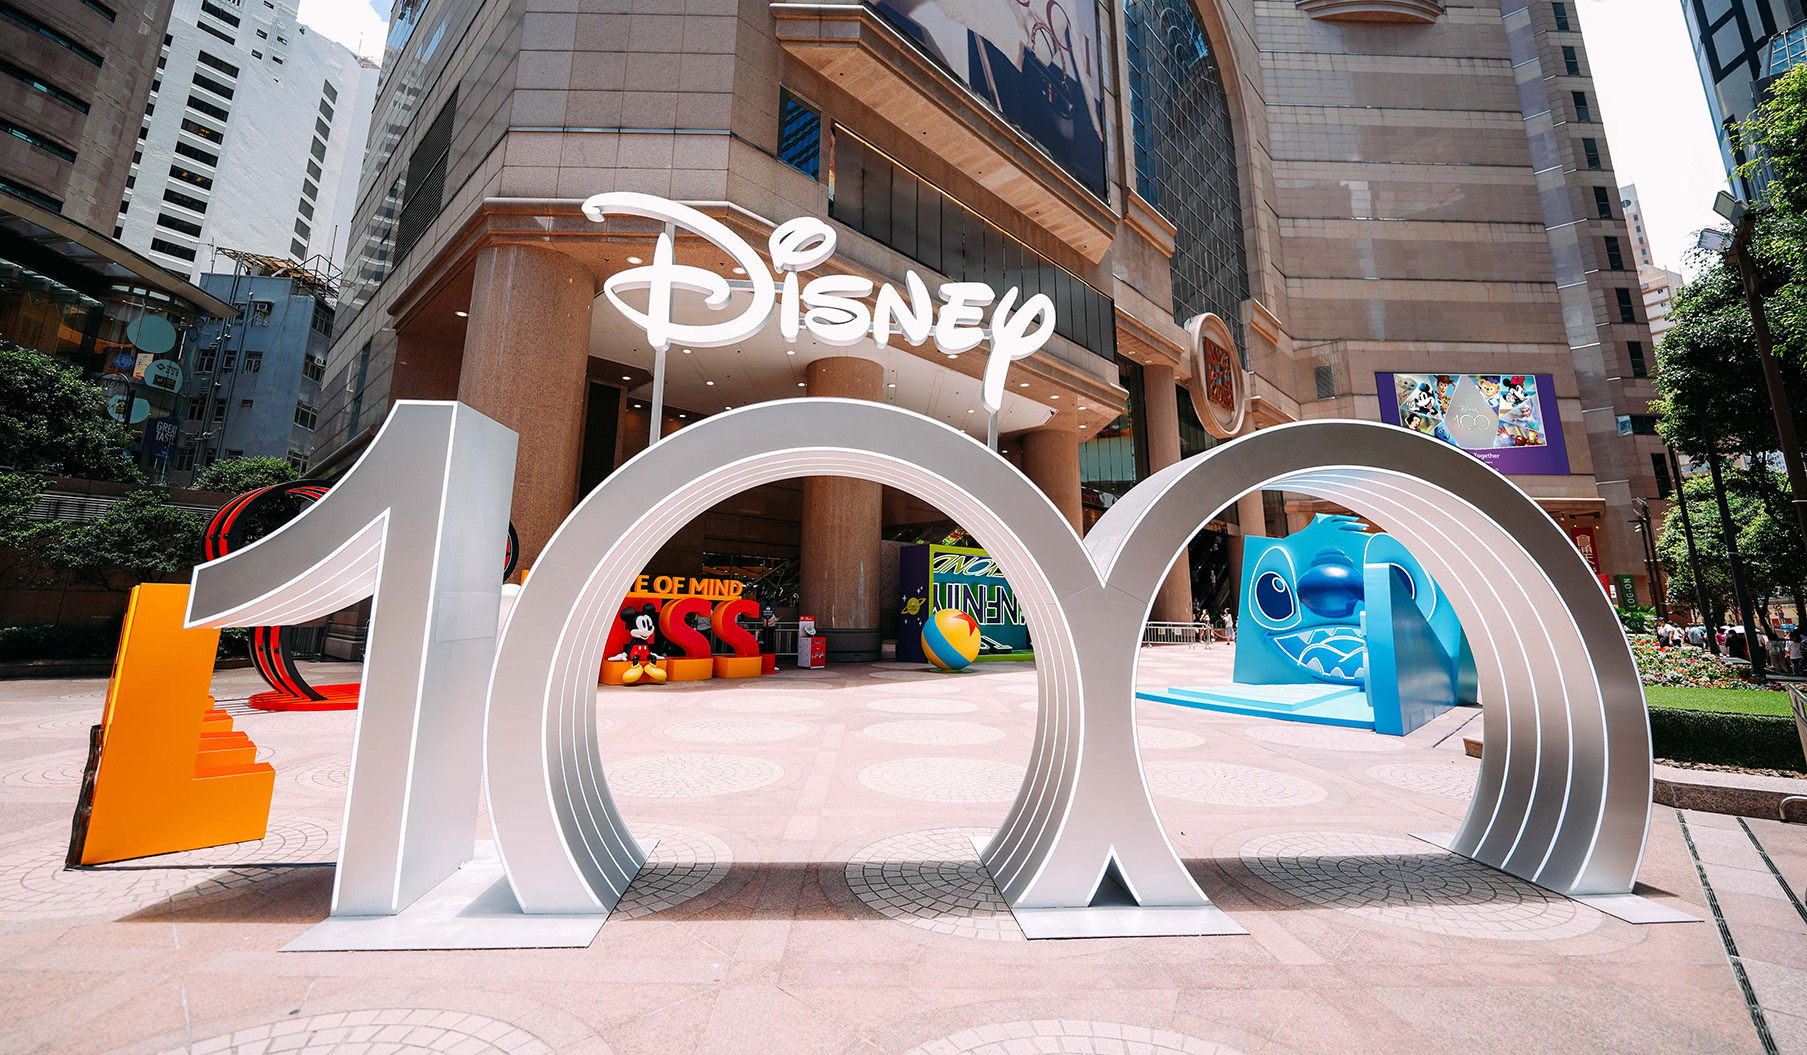 Disney 100th anniversary event in Hong Kong 